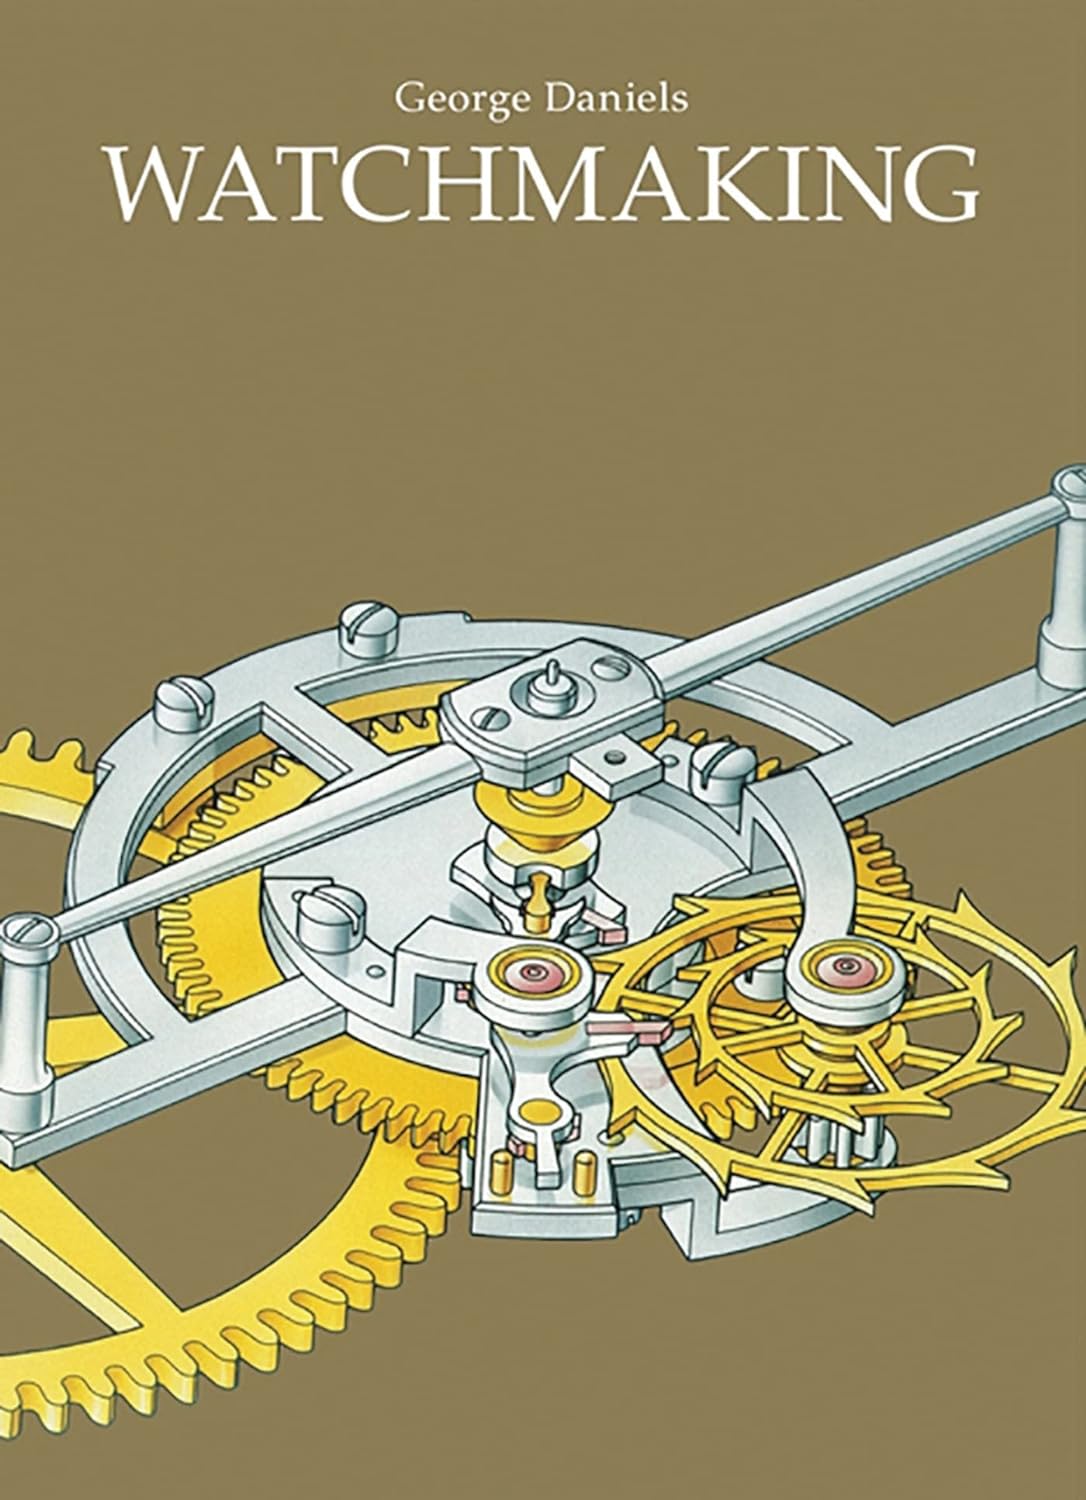 Watchmaking (2011)